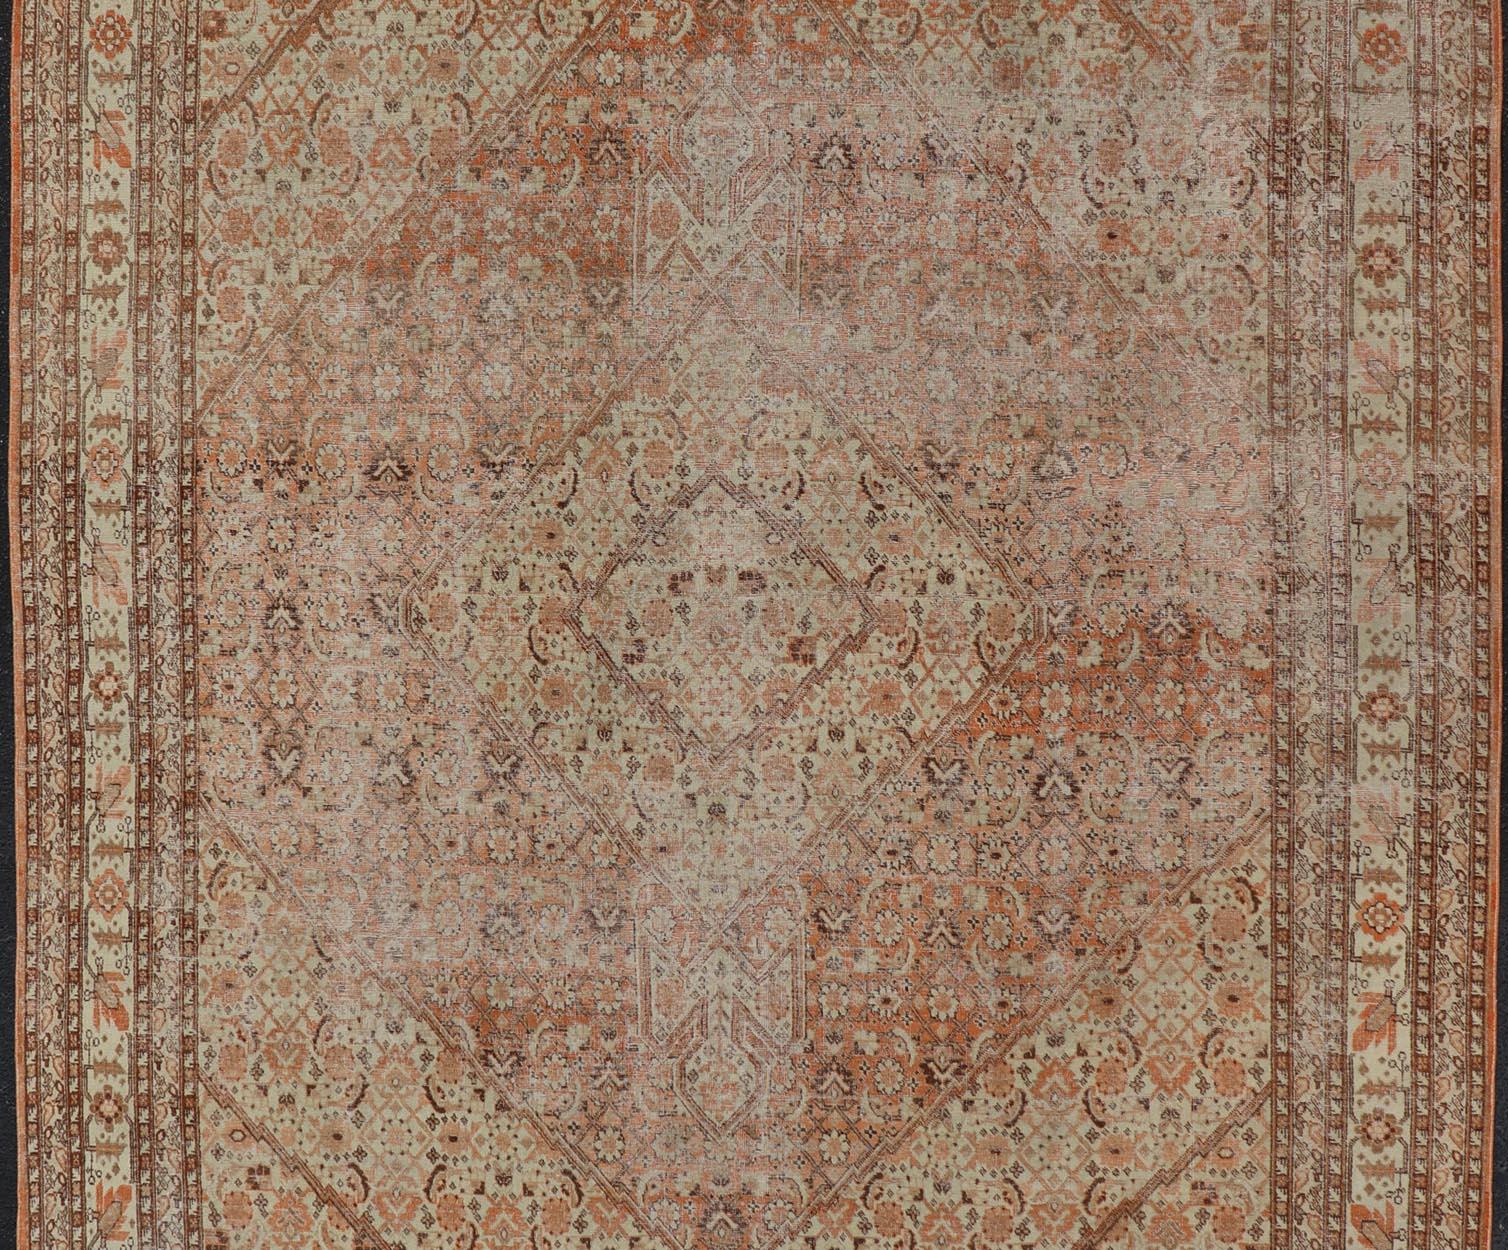 Hand-Knotted Antique Persian Tabriz with All-Over Medallion Design in Orange and Browns For Sale